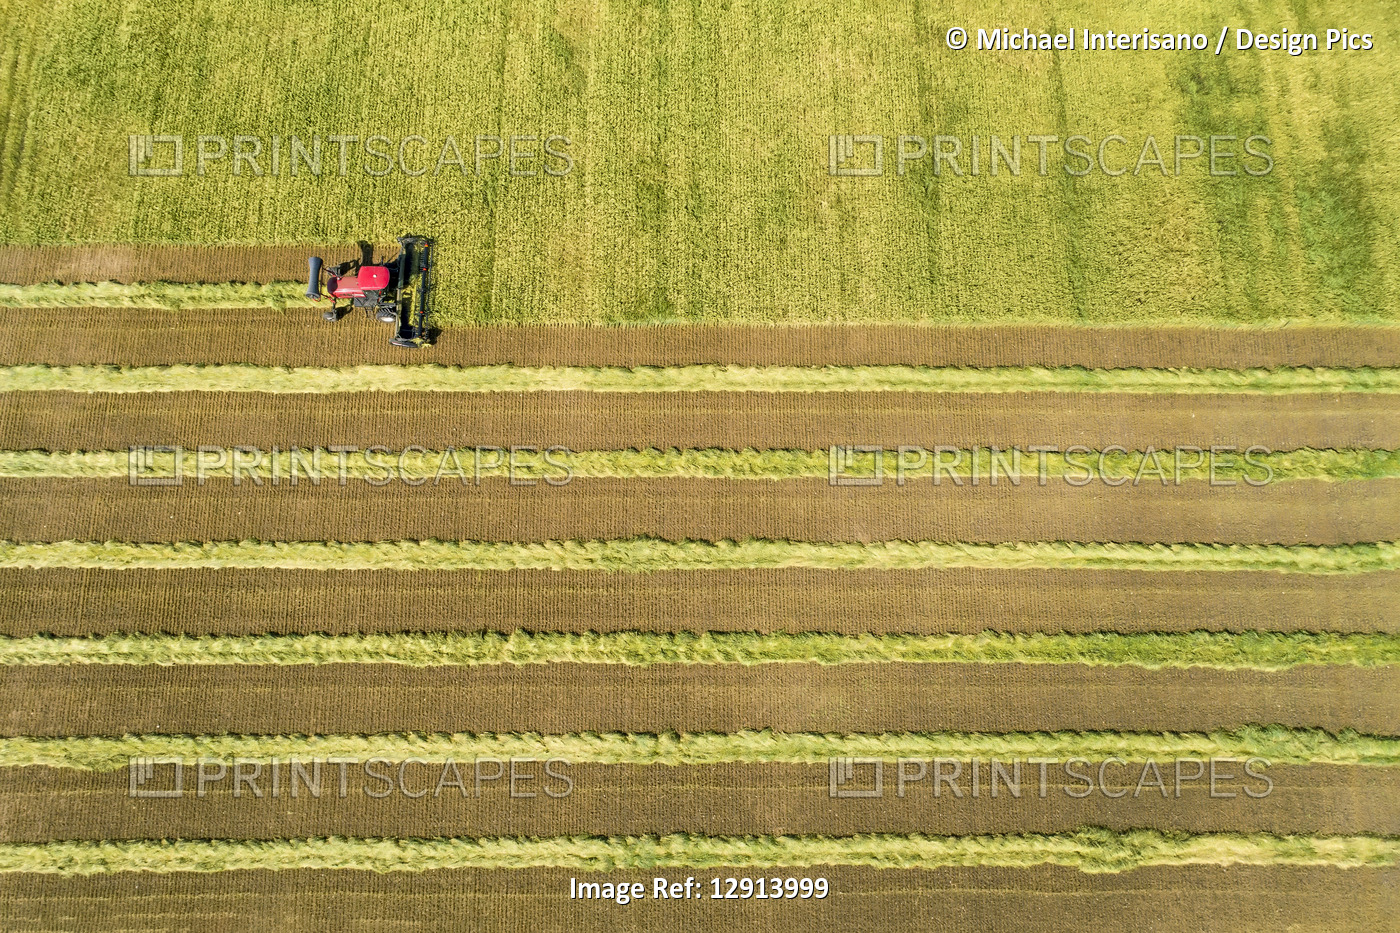 View from directly above of a swather cutting a barley field with graphic ...